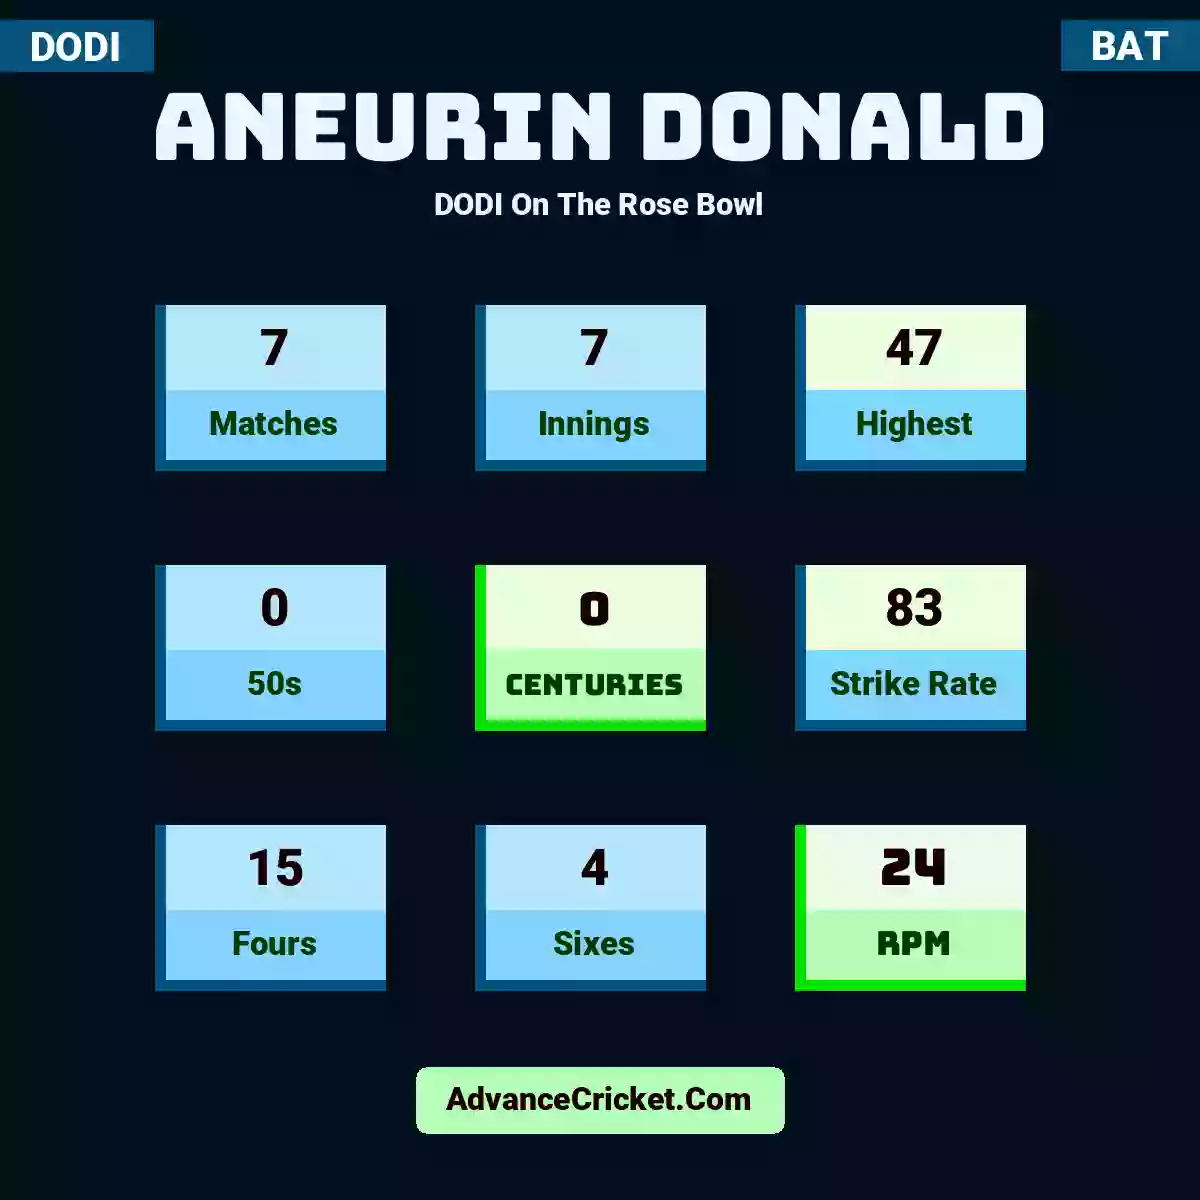 Aneurin Donald DODI  On The Rose Bowl, Aneurin Donald played 7 matches, scored 47 runs as highest, 0 half-centuries, and 0 centuries, with a strike rate of 83. A.Donald hit 15 fours and 4 sixes, with an RPM of 24.